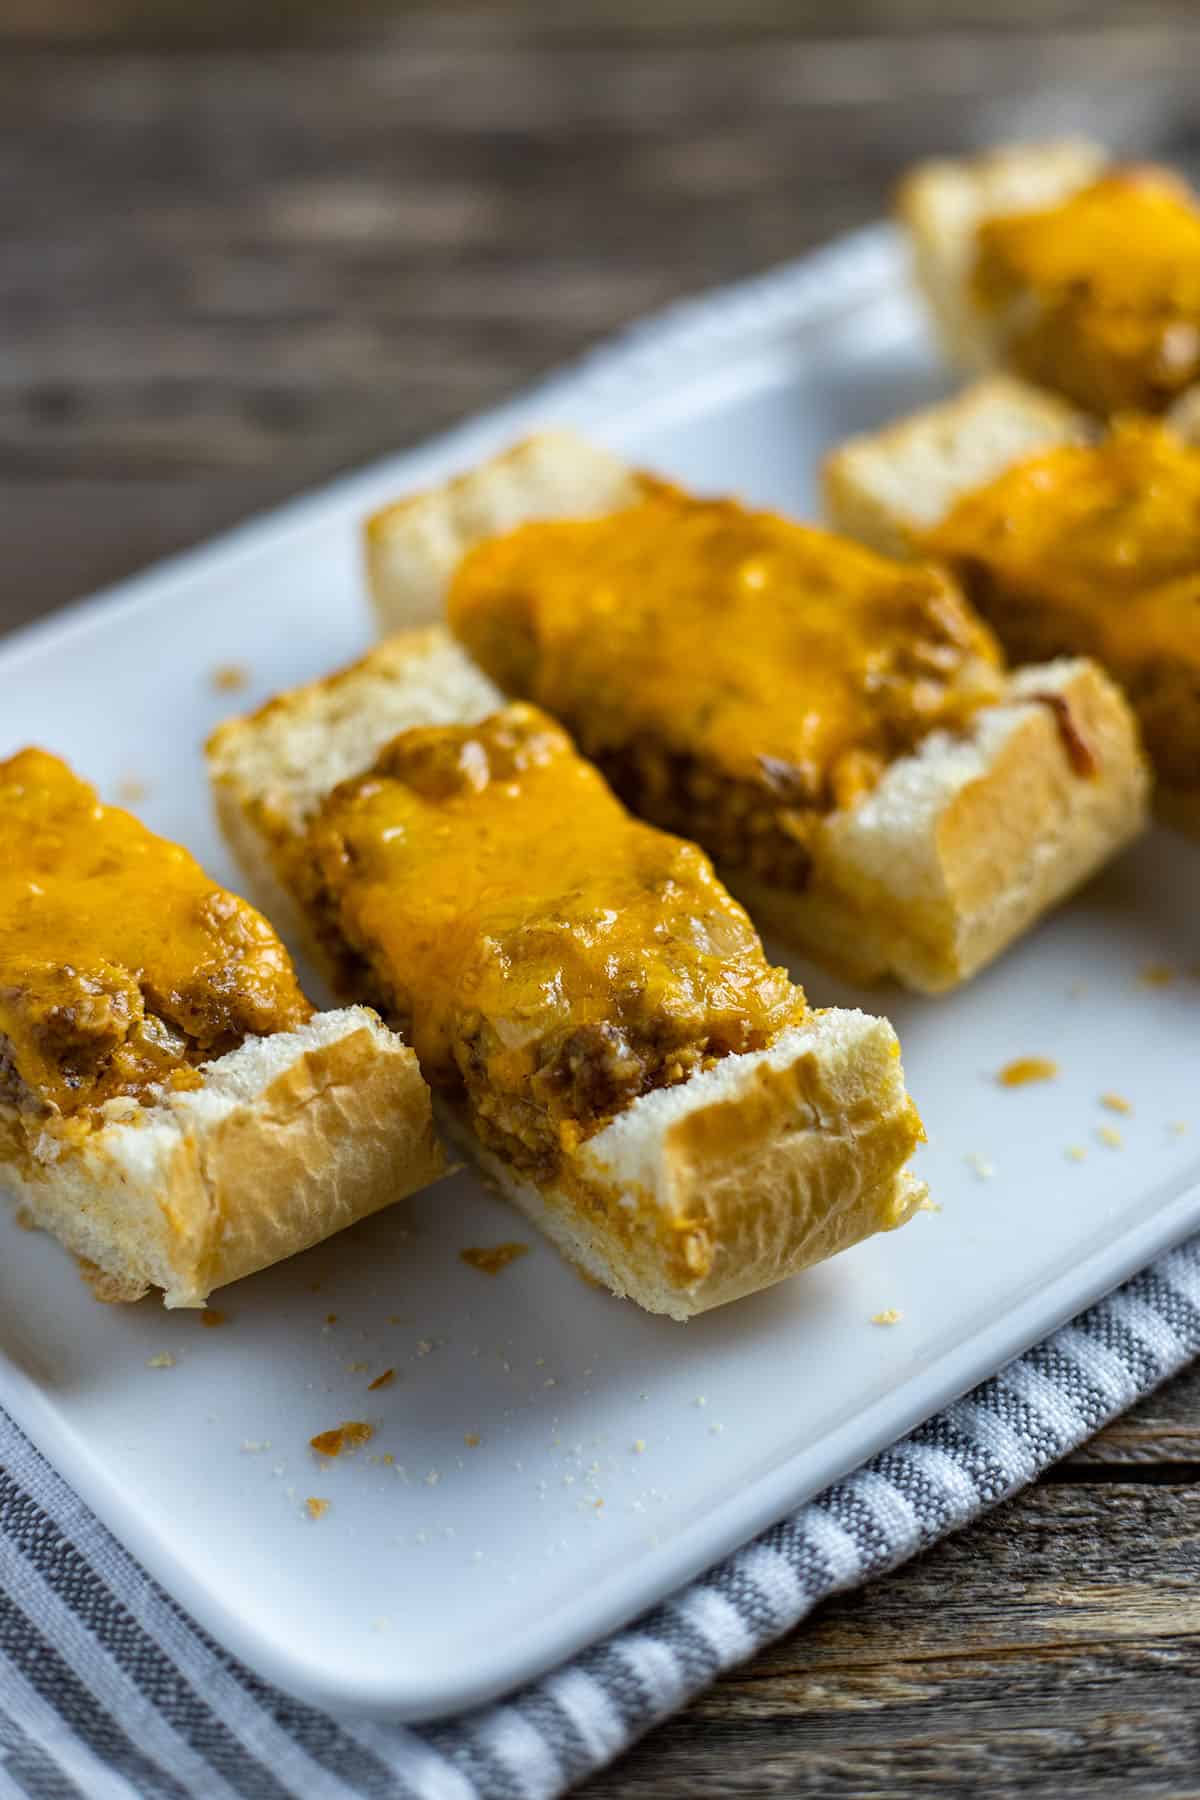 baked cheeseburger stuffed french bread sliced on white plate